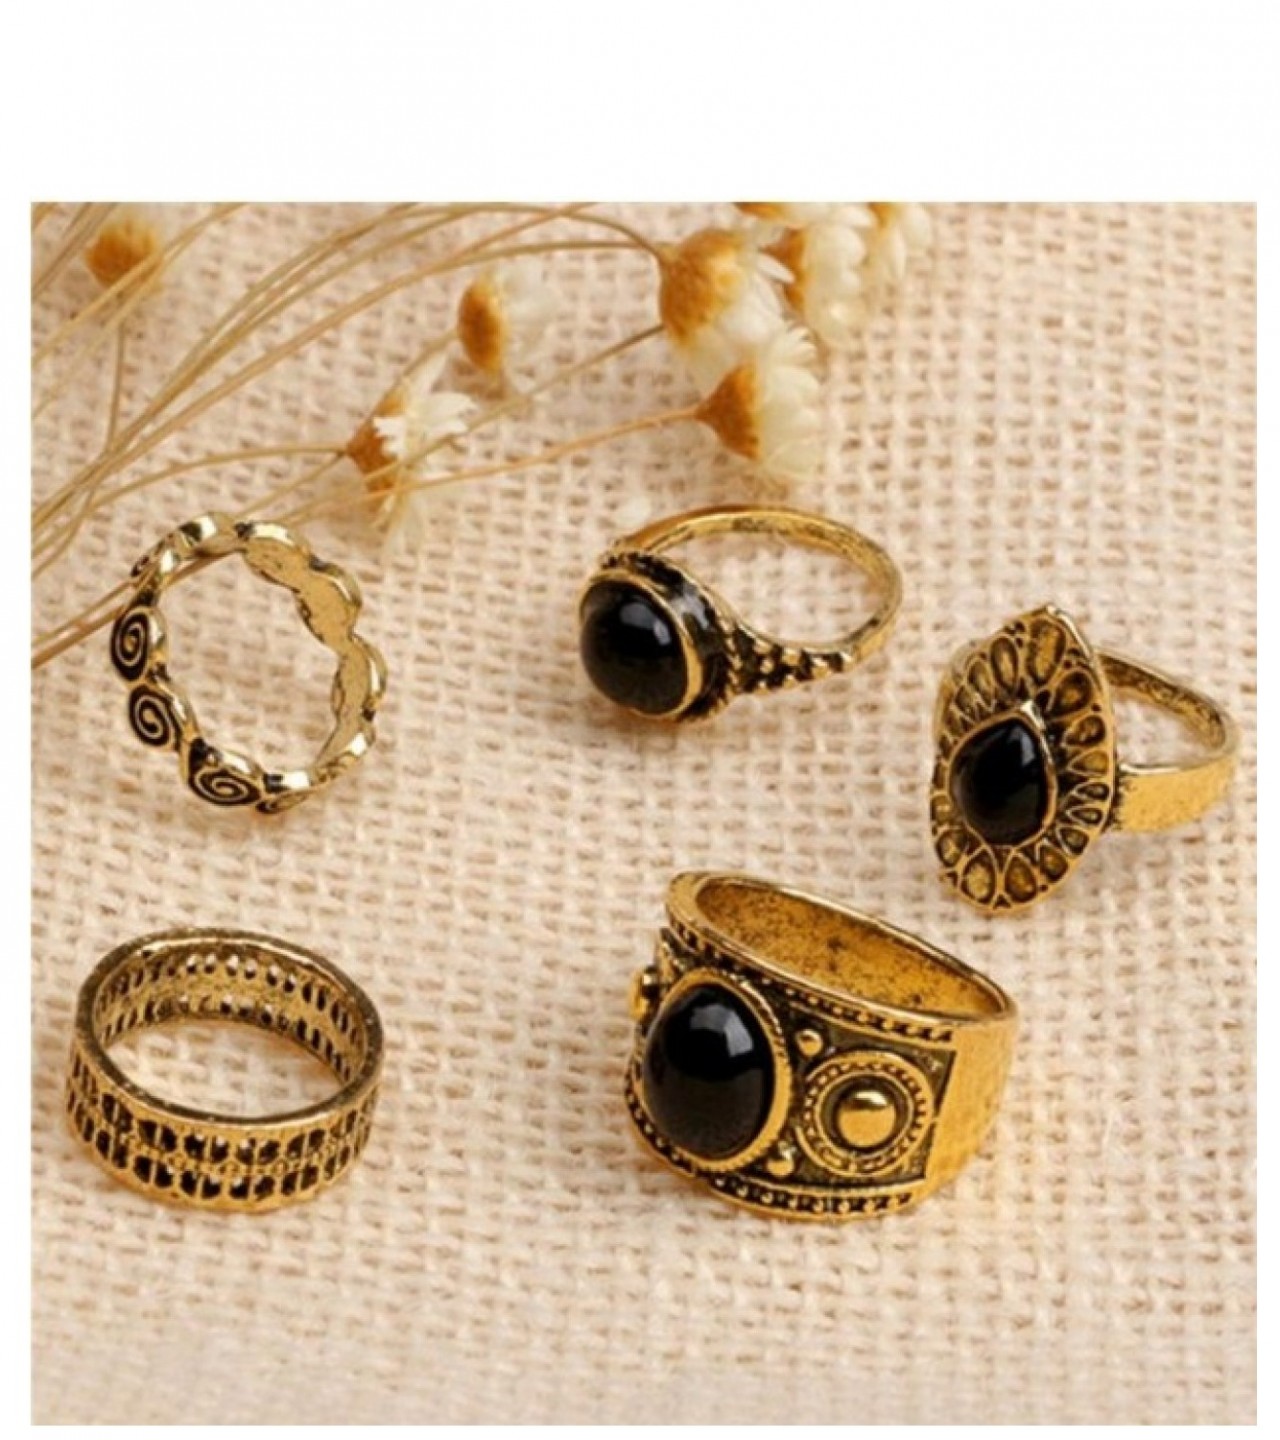 Retro Black Gem Ring Water Droplets Clouds Circle Rings - Gold